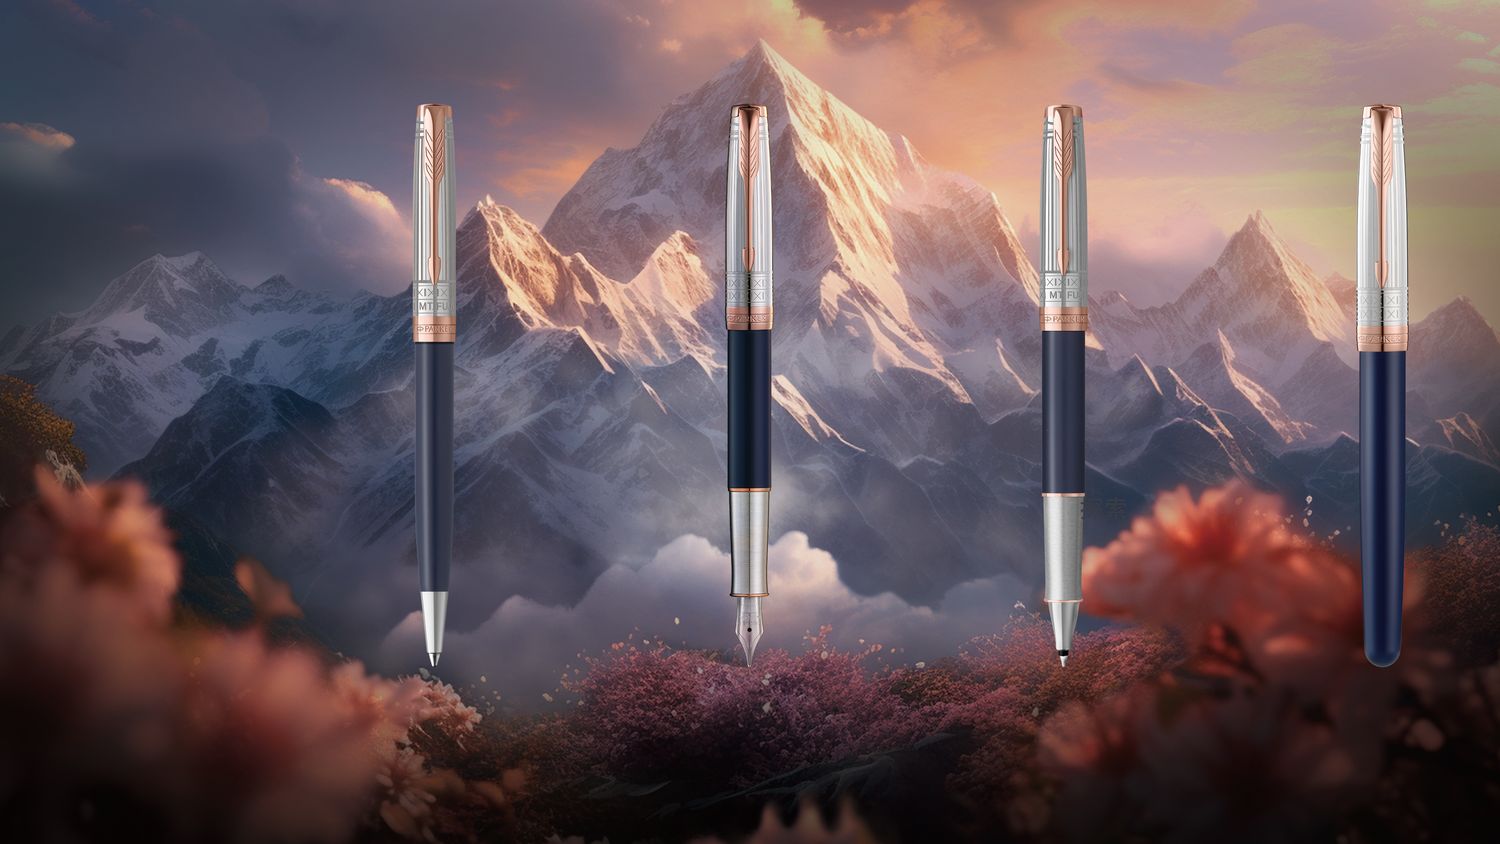 Parker & Waterman Pens Taiwan 派克 鋼筆 臺灣總代理 | Special Edition Intrepid Journeys Collection, Mt. Fuji Edition